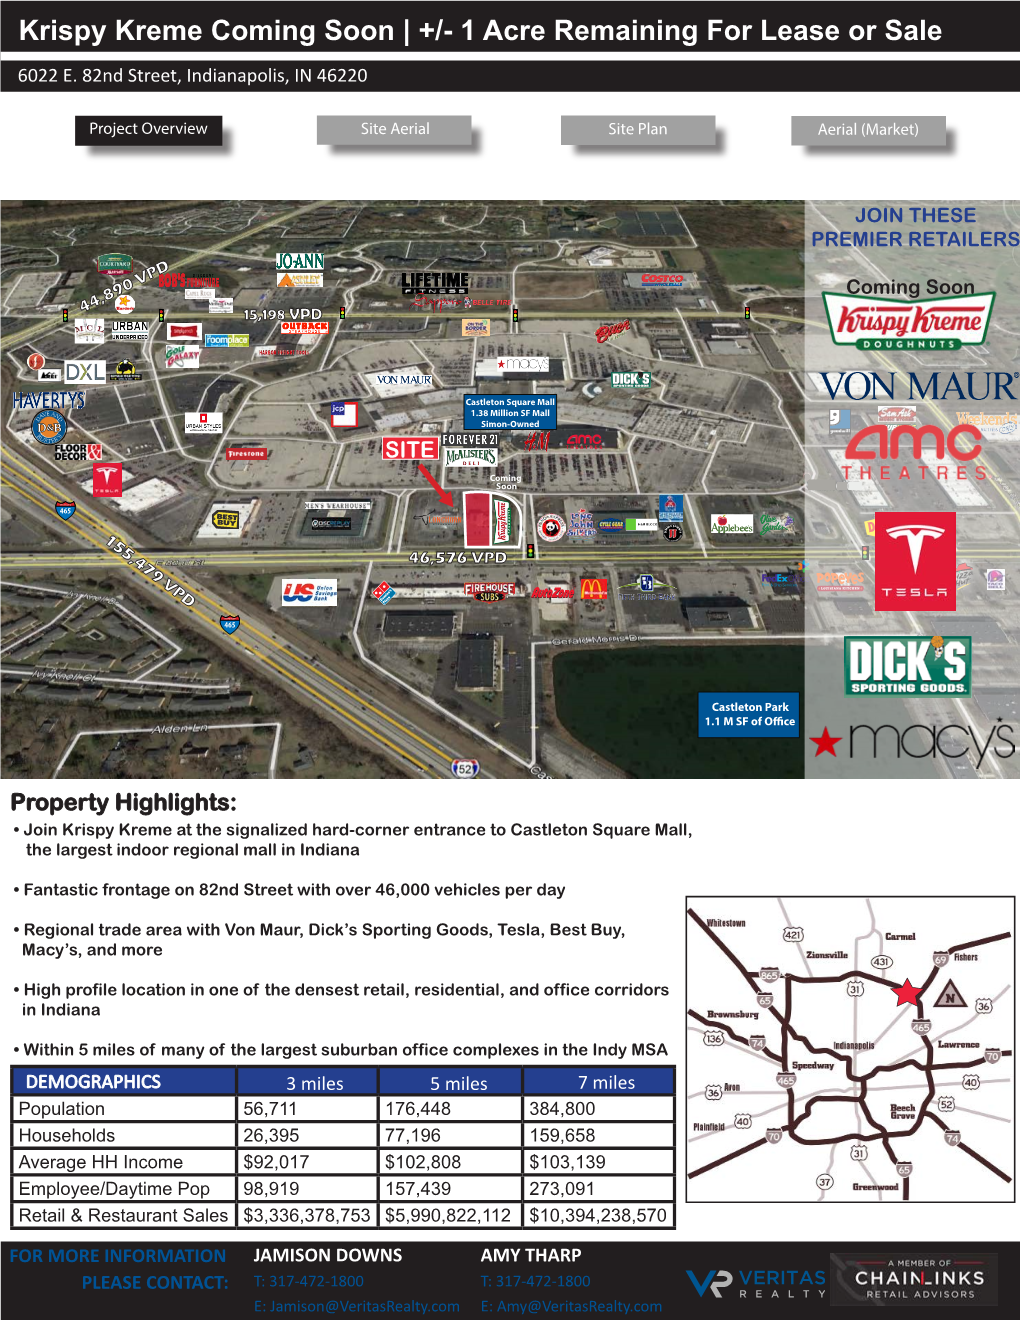 Krispy Kreme Coming Soon | +/- 1 Acre Remaining for Lease Or Sale 6022 E